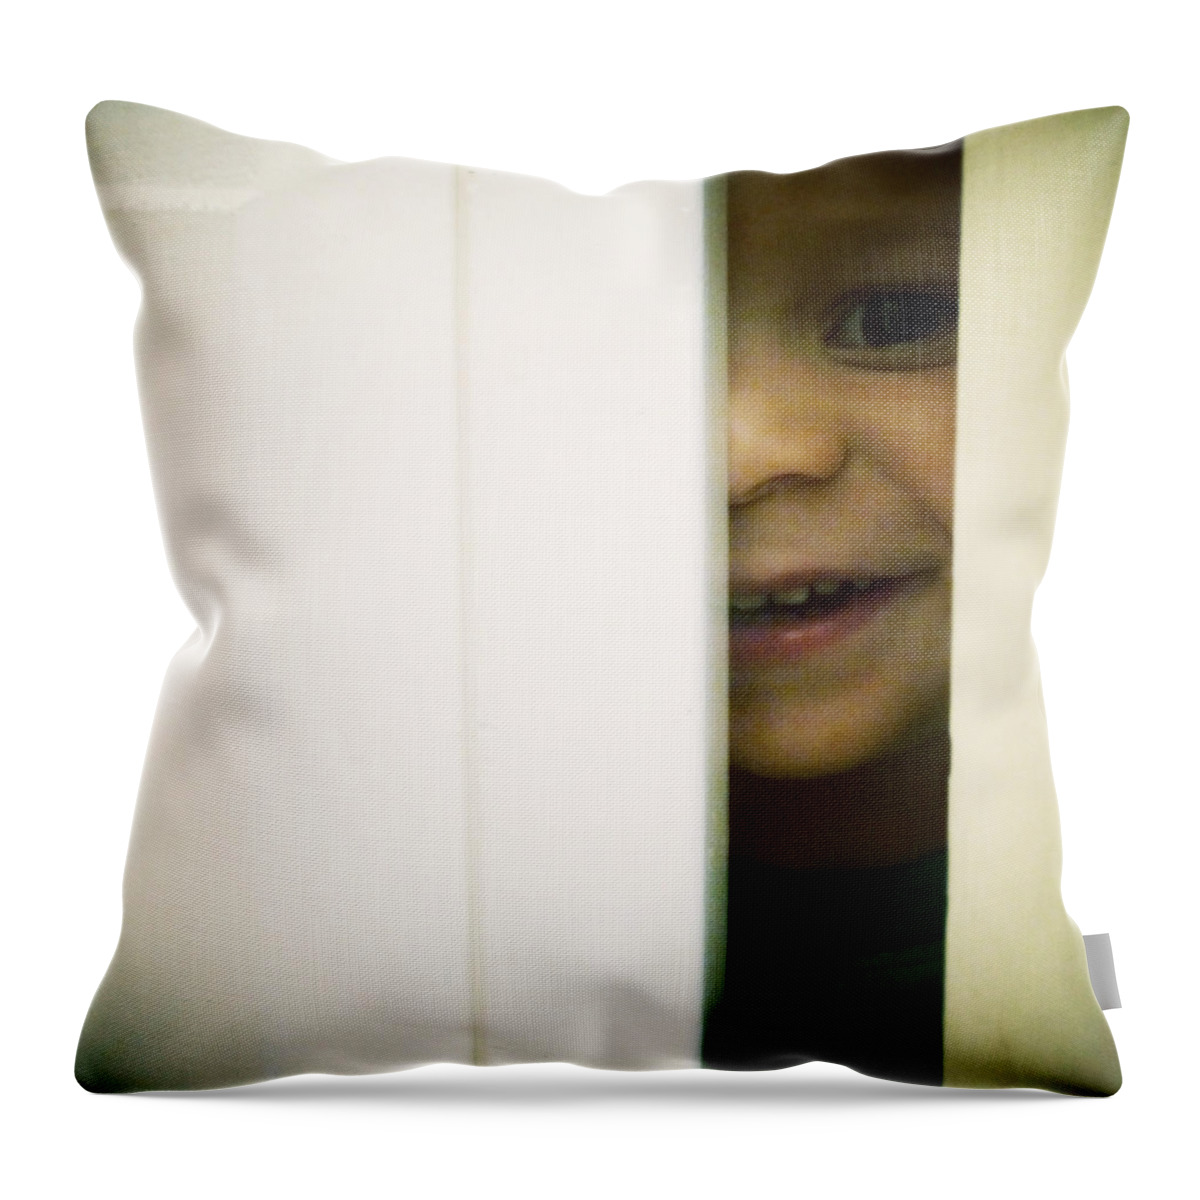 Family Throw Pillow featuring the photograph Hide and Seek by Natasha Marco